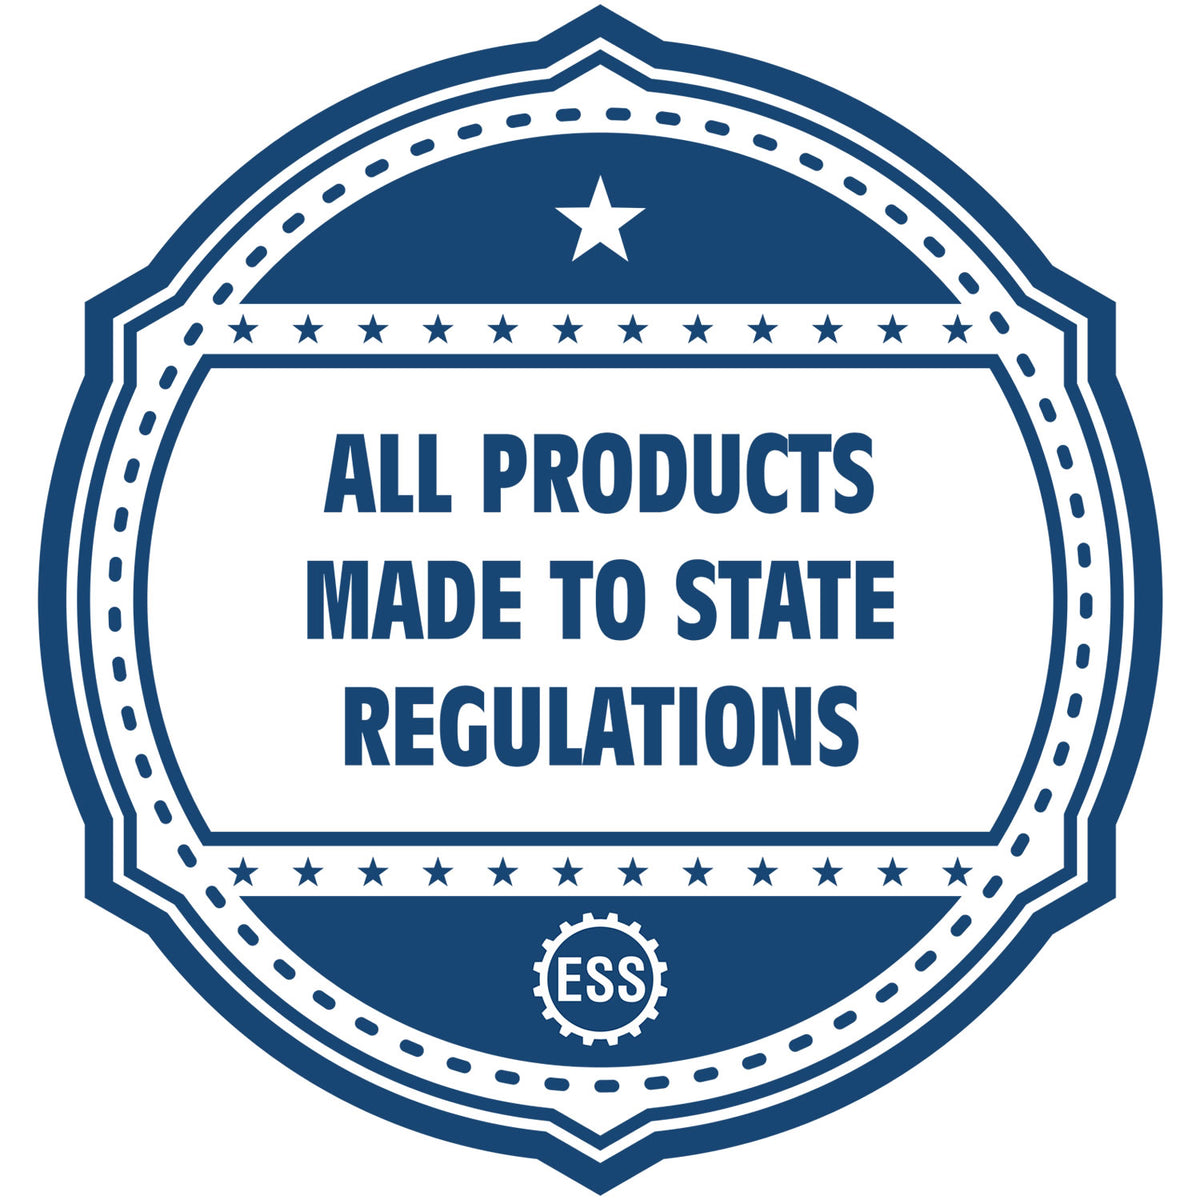 An icon or badge element for the Slim Pre-Inked Colorado Architect Seal Stamp showing that this product is made in compliance with state regulations.